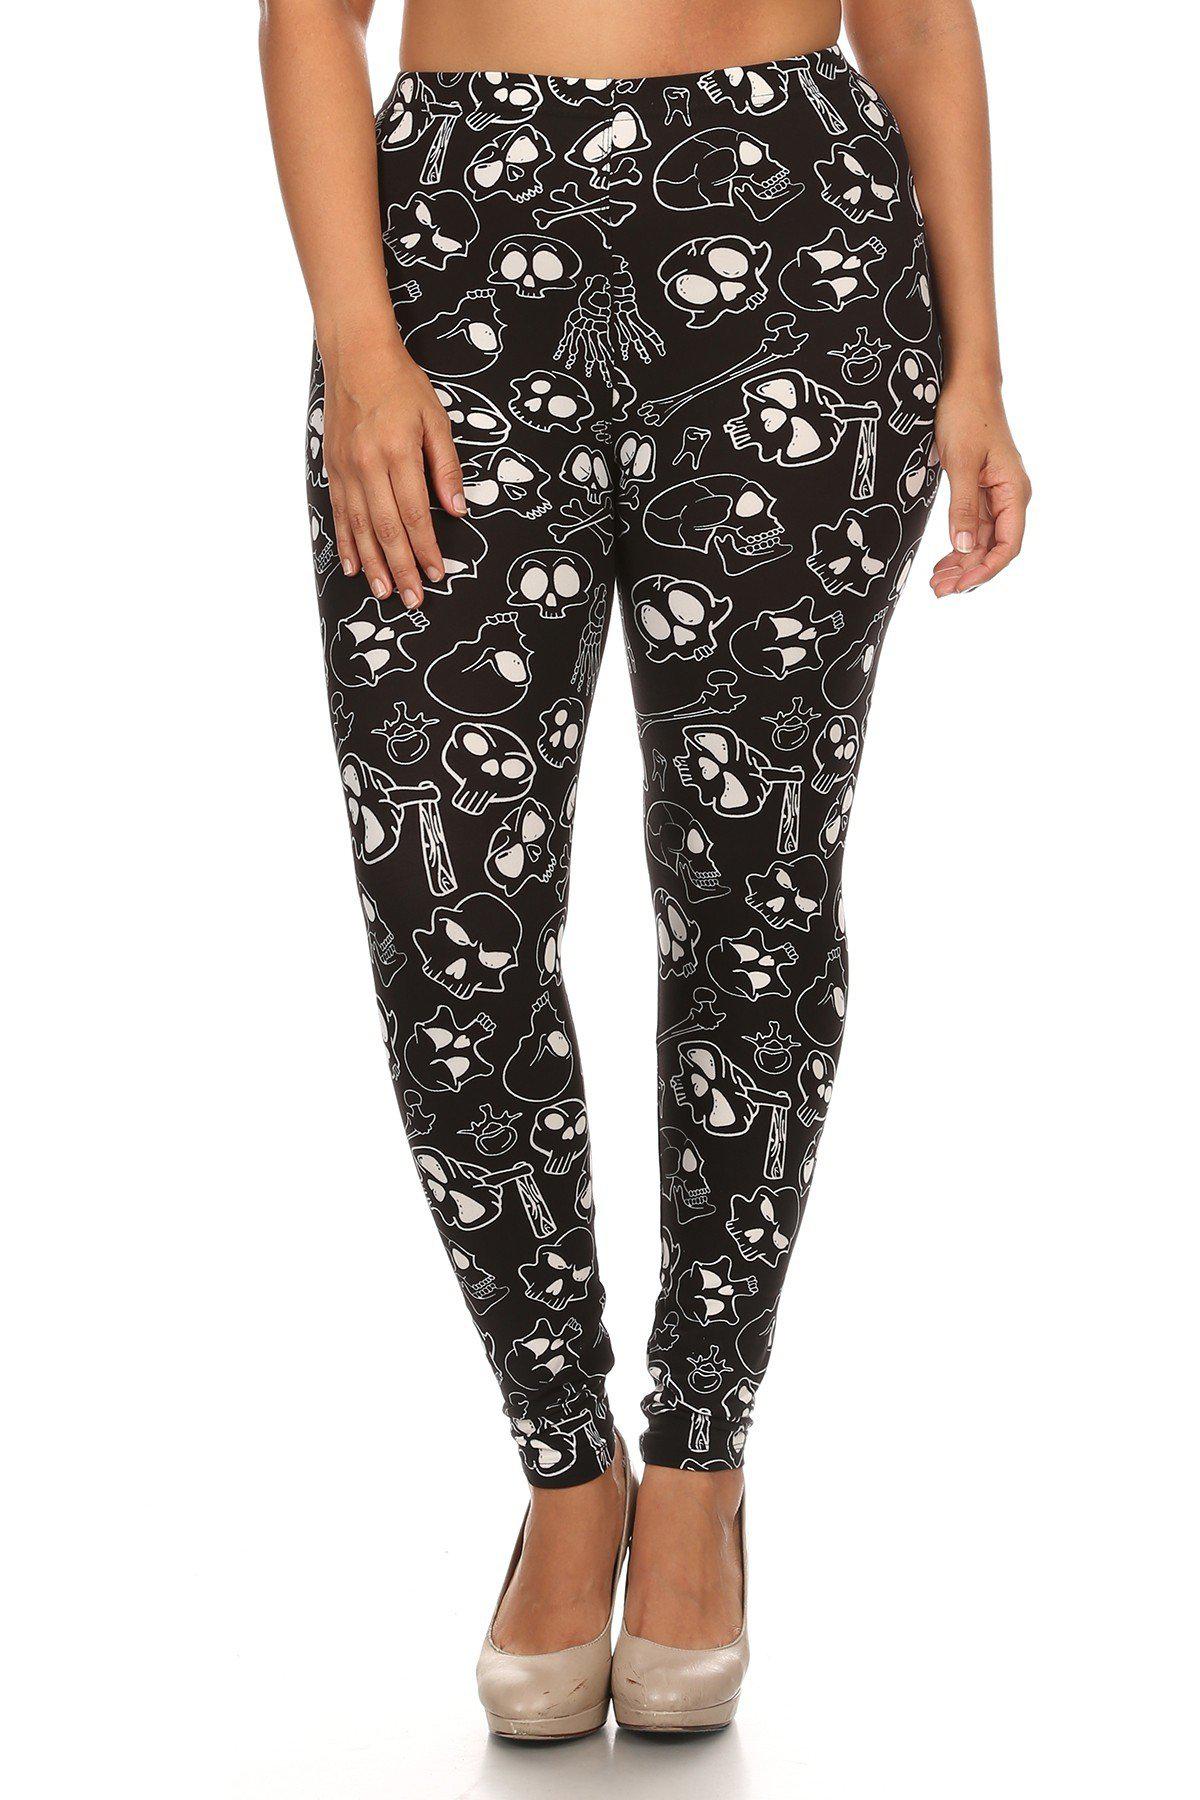 Plus Size Print, Full Length Leggings In A Fitted Style With A Banded High Waist-[Adult]-[Female]-Multi-Blue Zone Planet